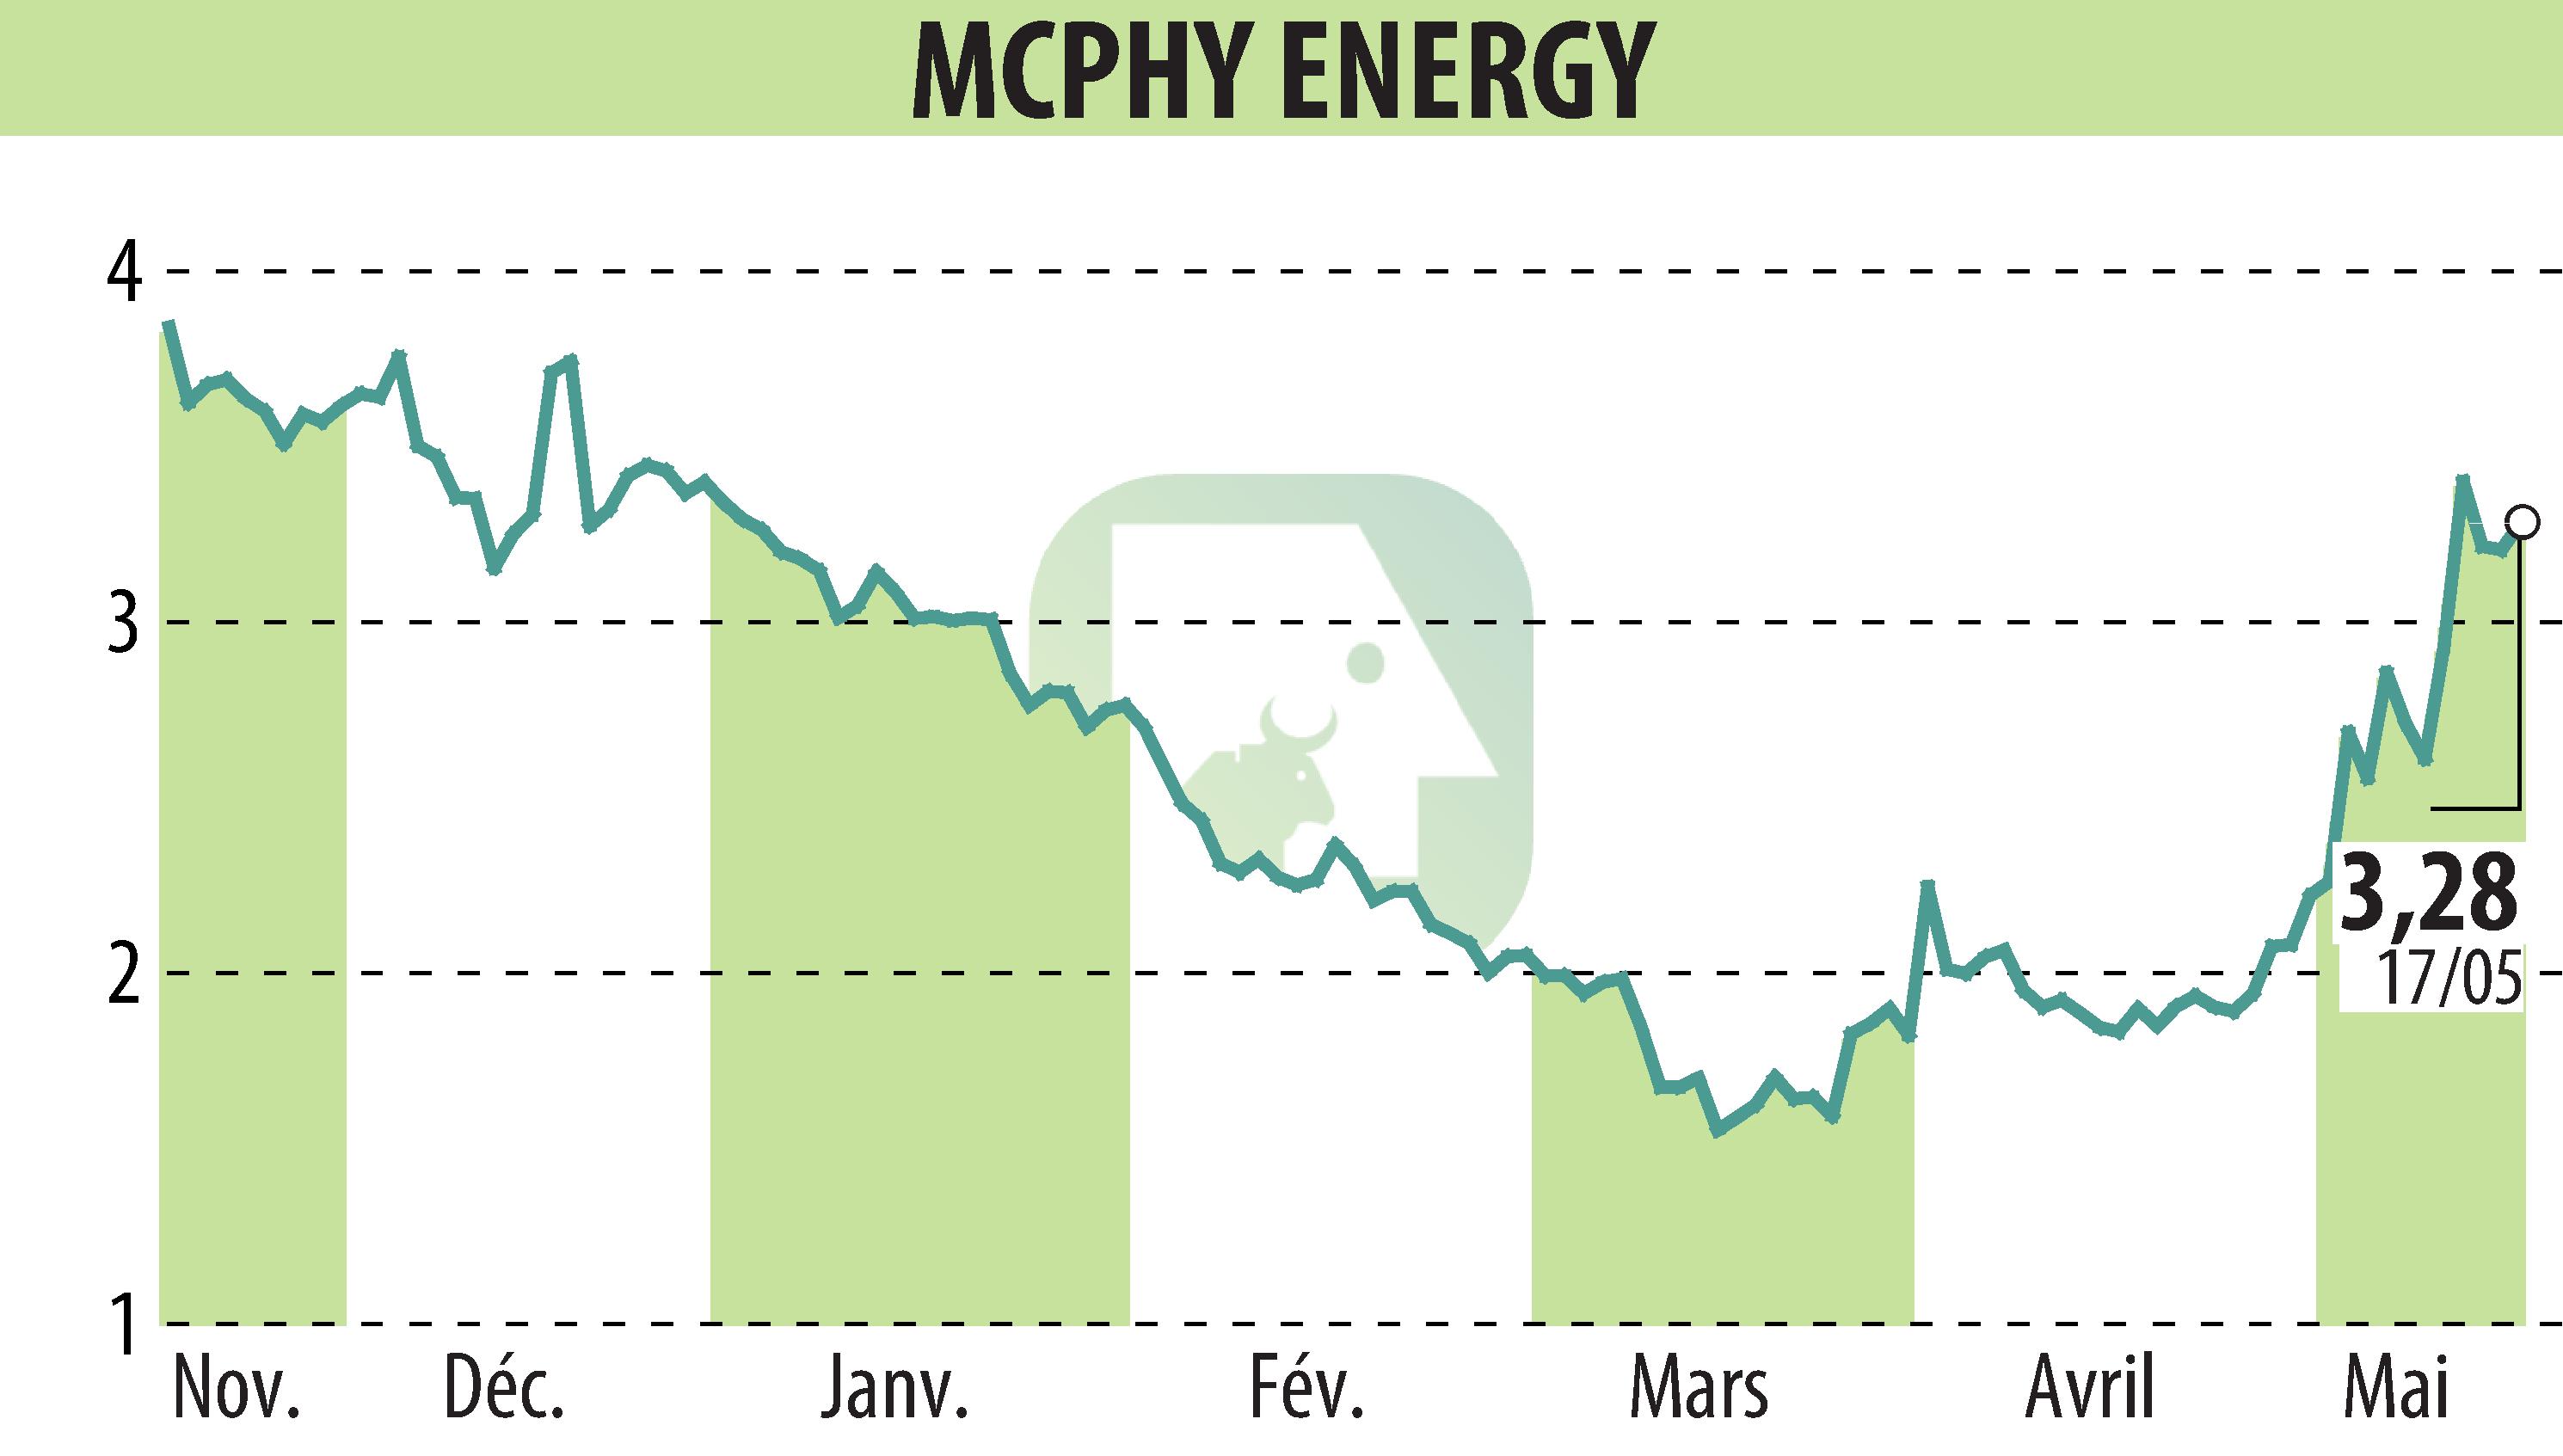 Stock price chart of MCPHY ENERGY (EPA:MCPHY) showing fluctuations.